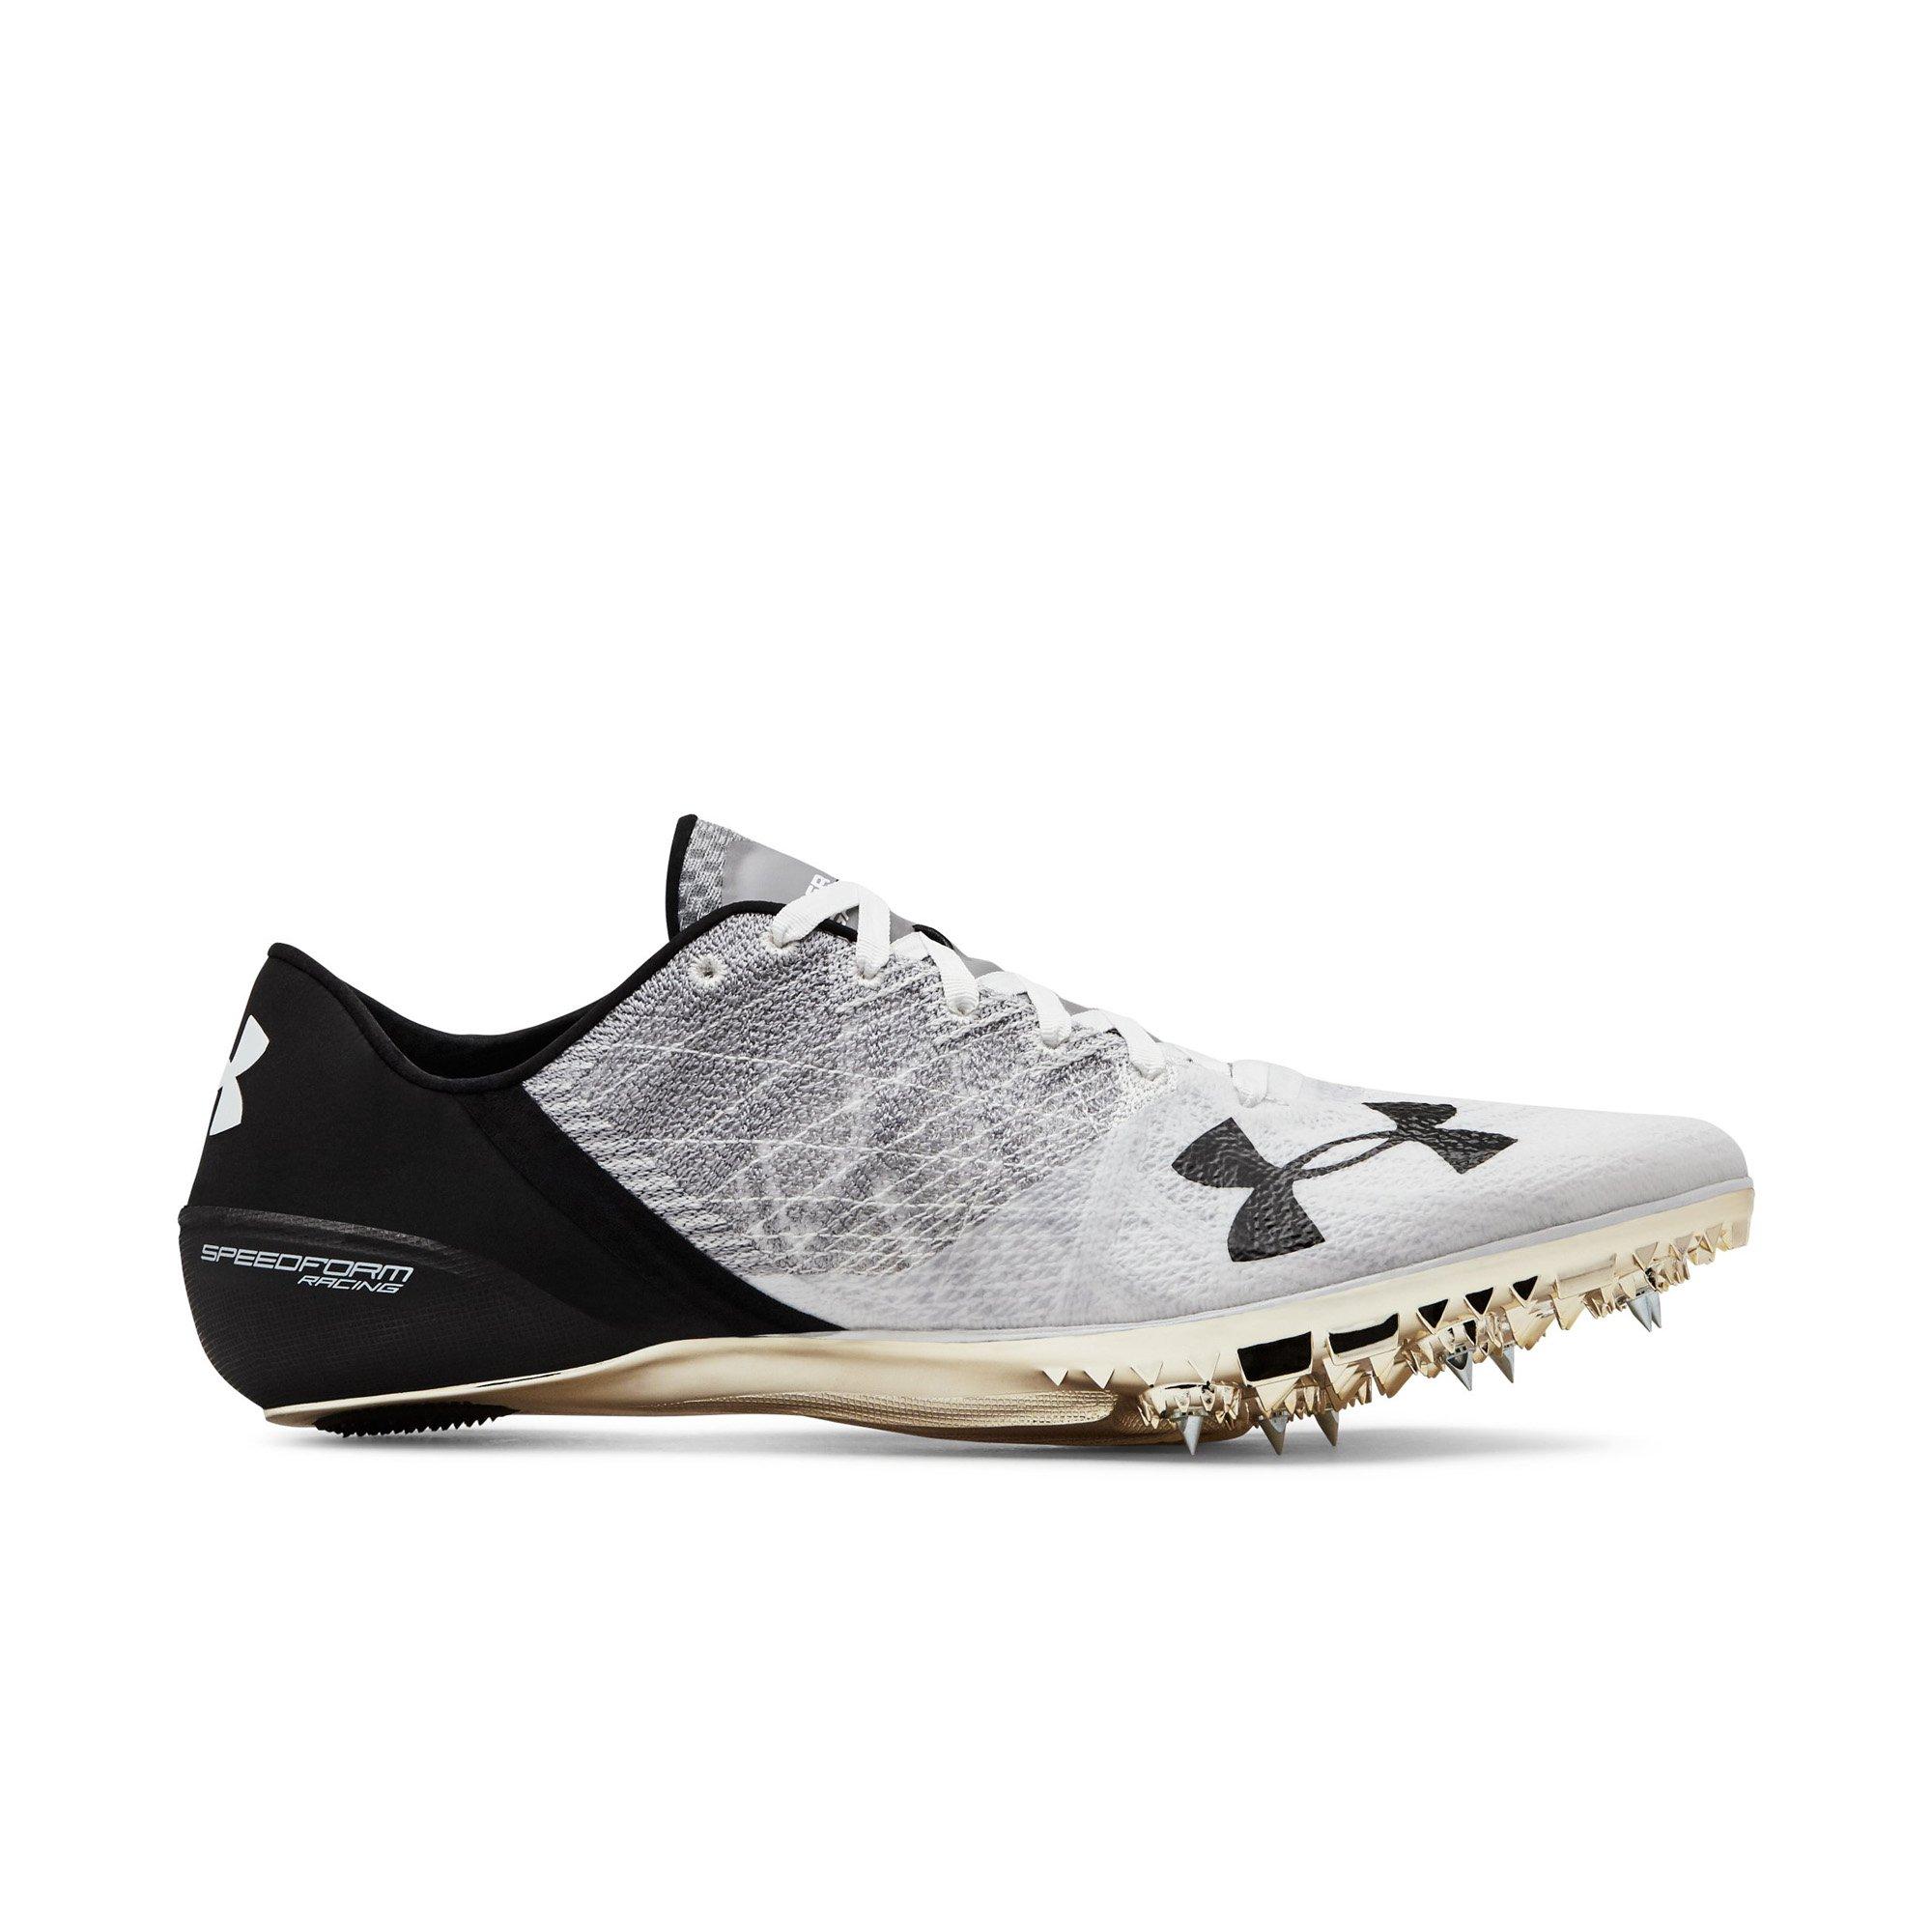 under armor track spikes